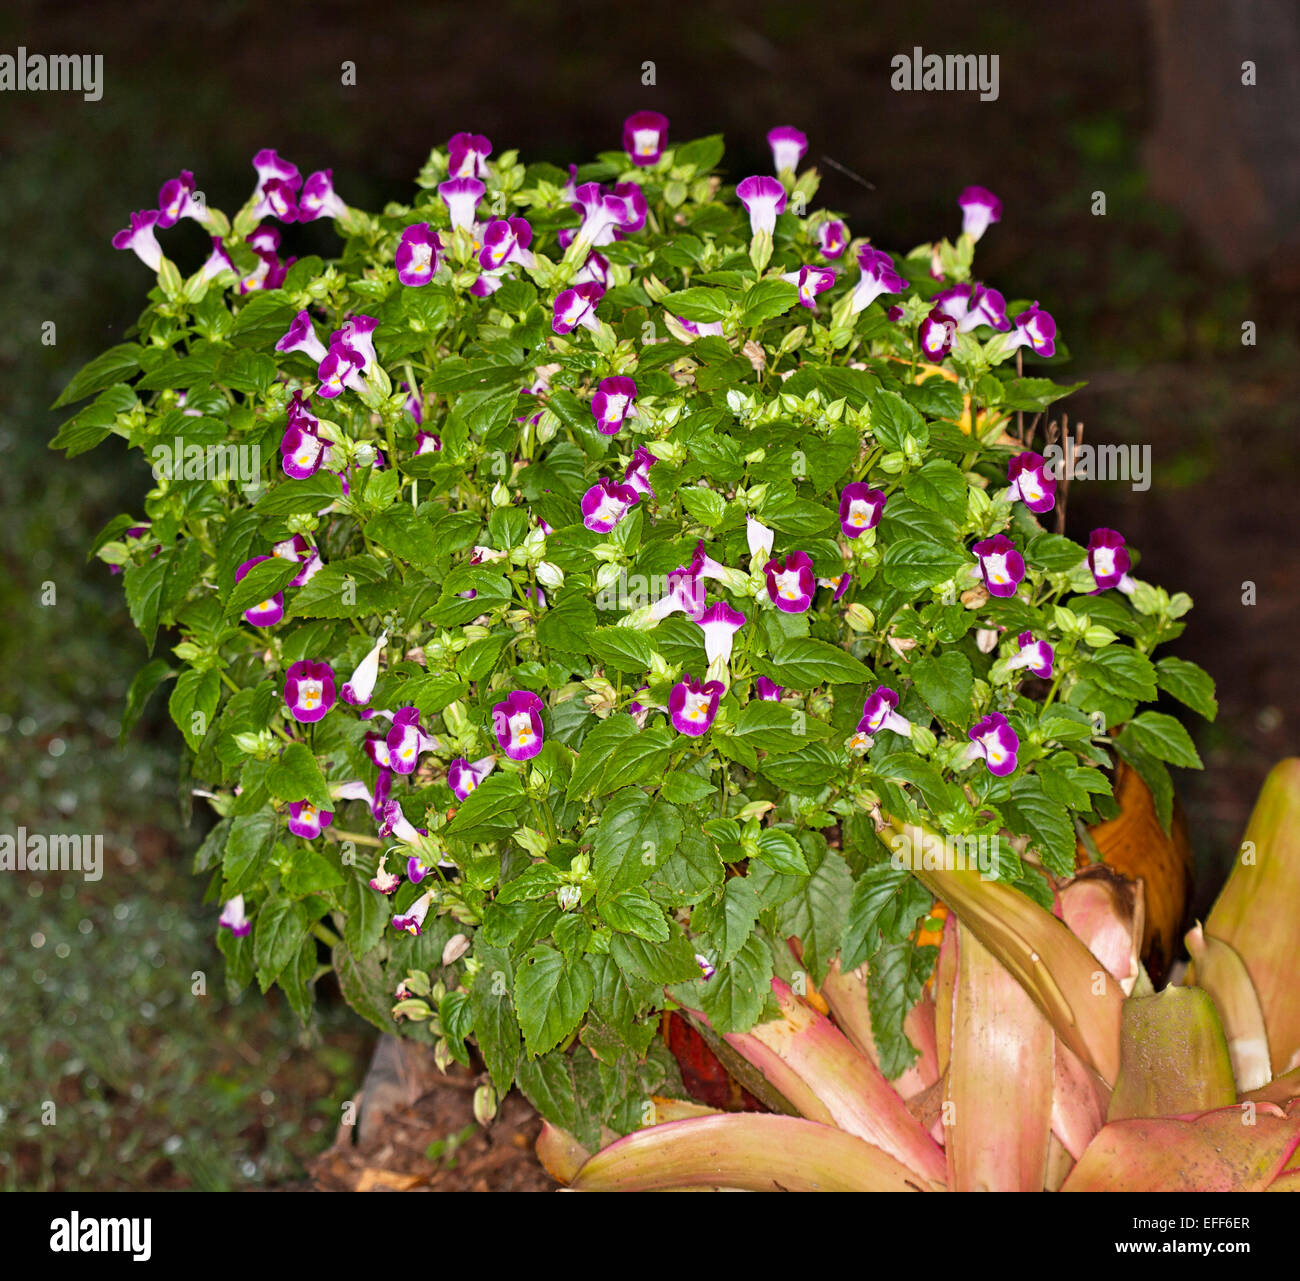 Cluster of bright purple / magenta and white flowers & green leaves of Torenia, an annual garden plant, against dark background Stock Photo